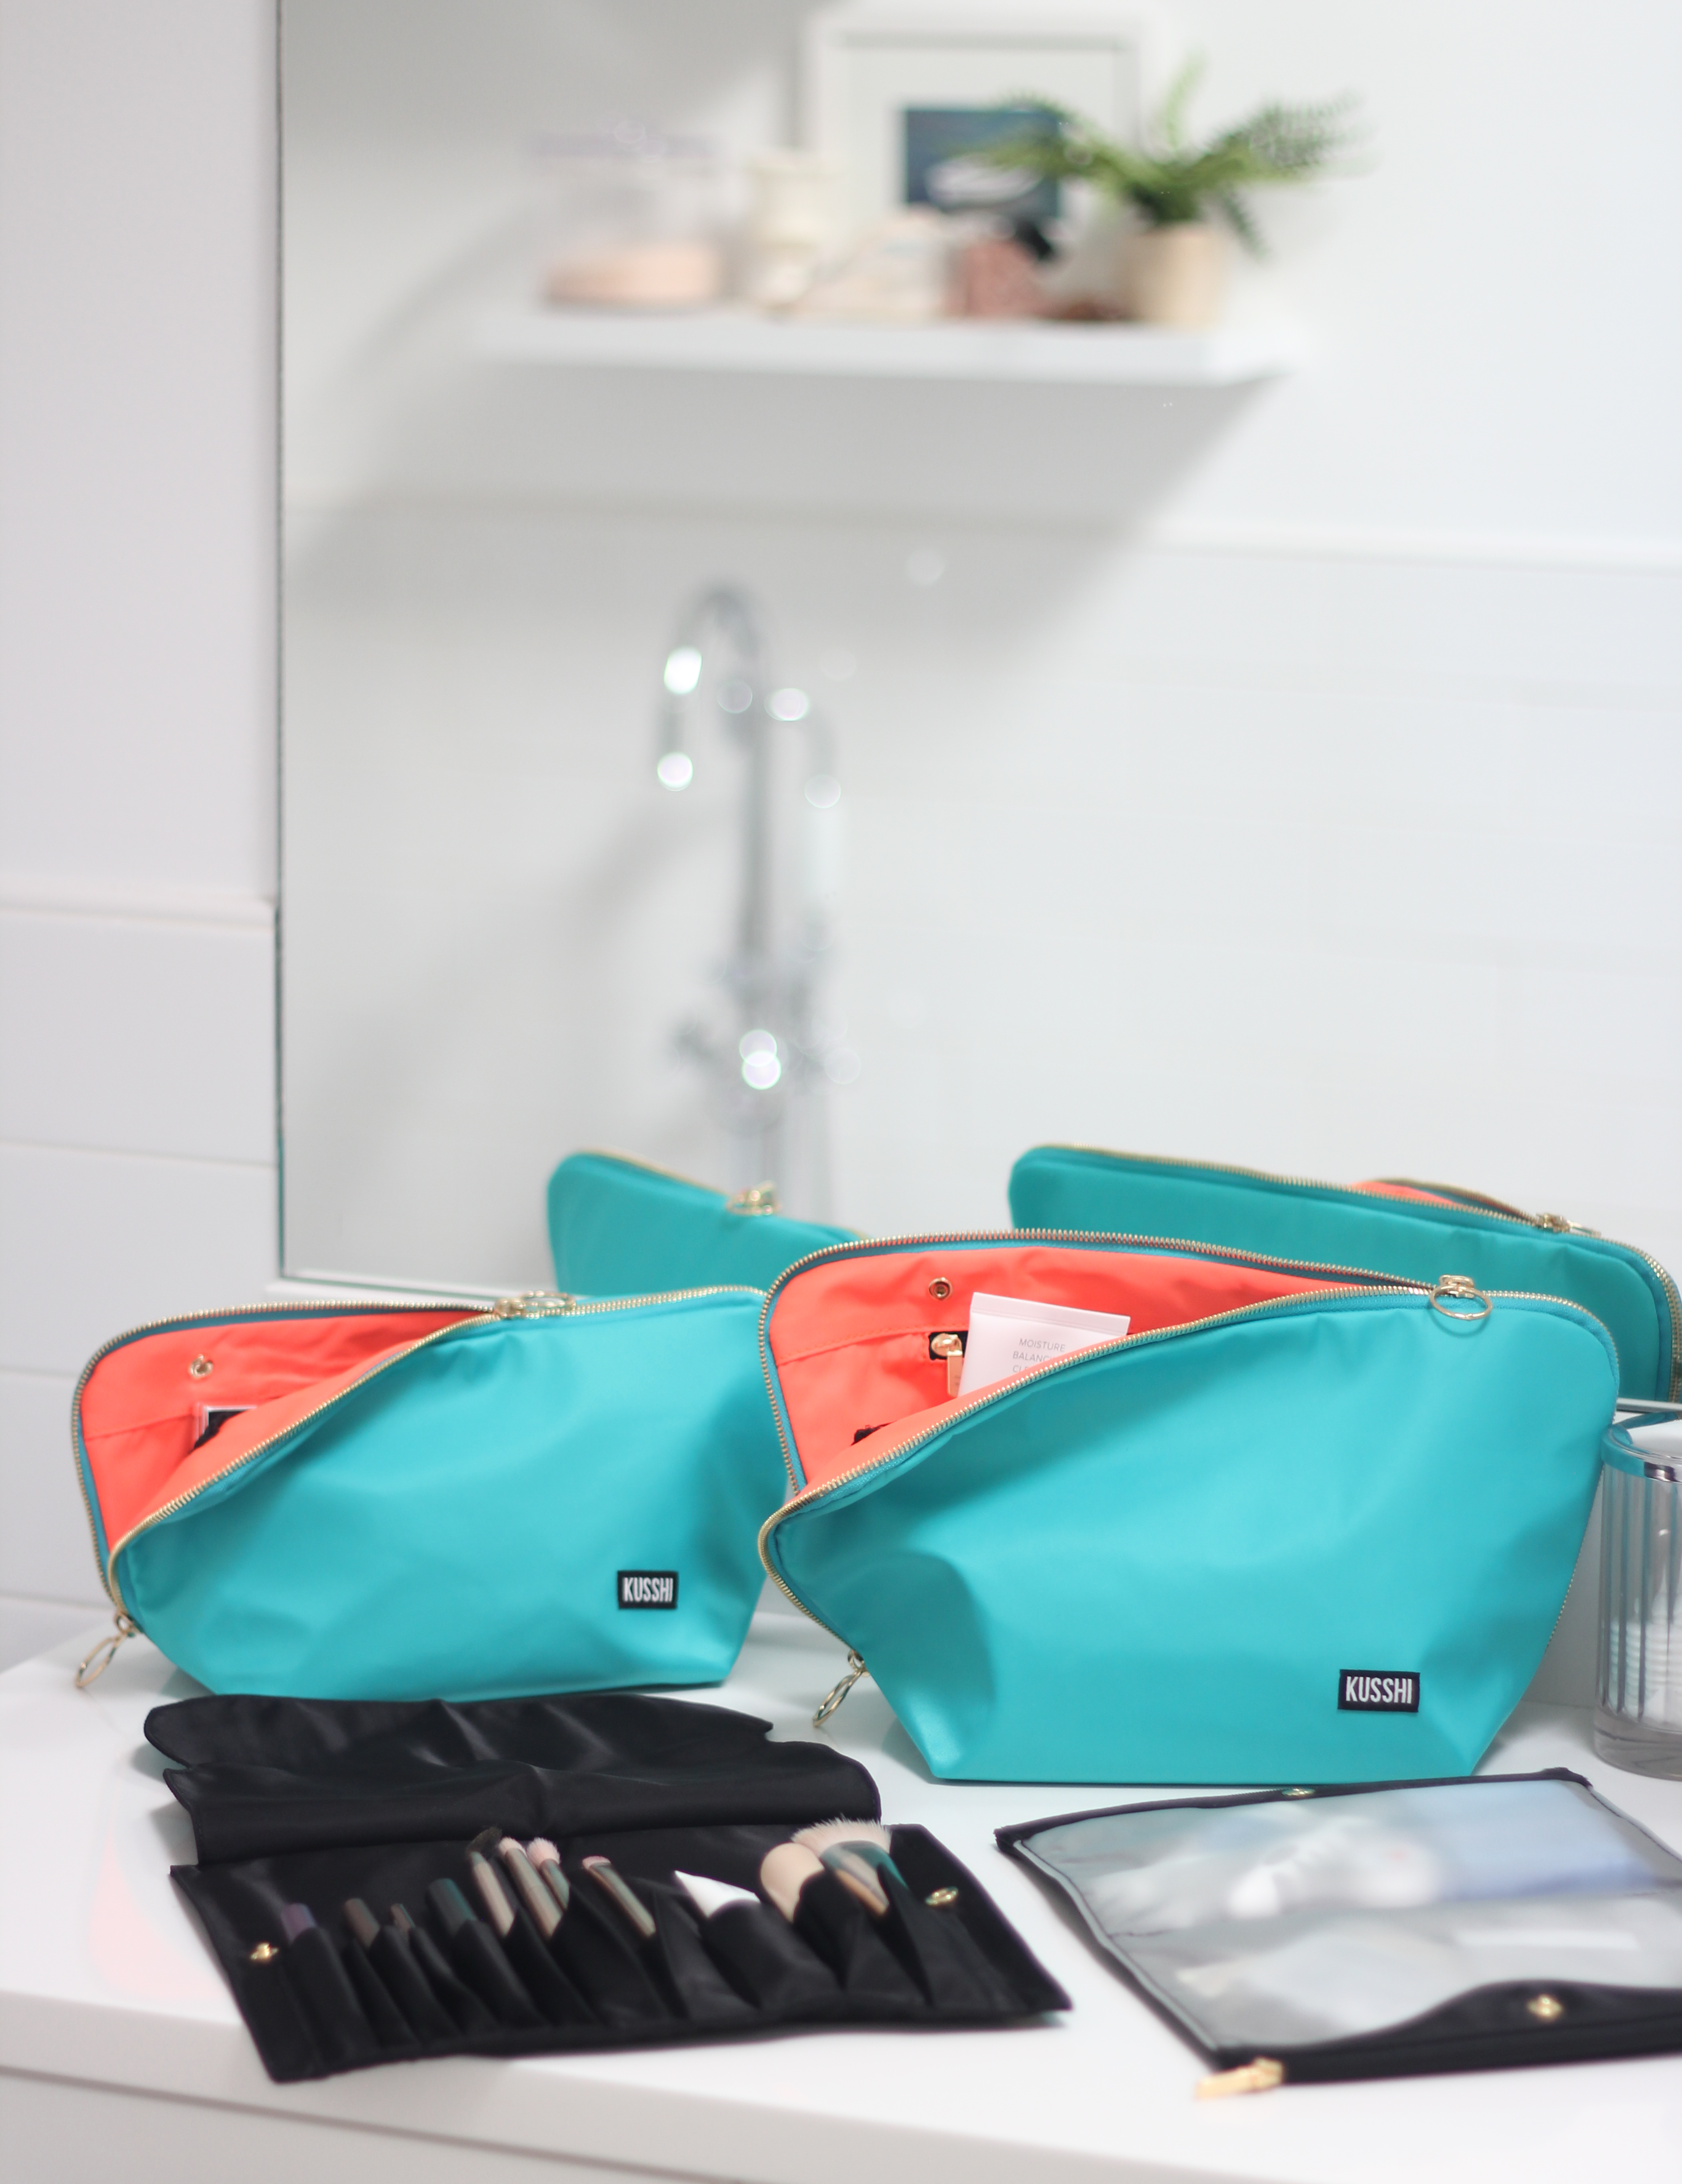 Your search is over! These are the best travel makeup bags! They stand up, are Washable, and have lots of organization!